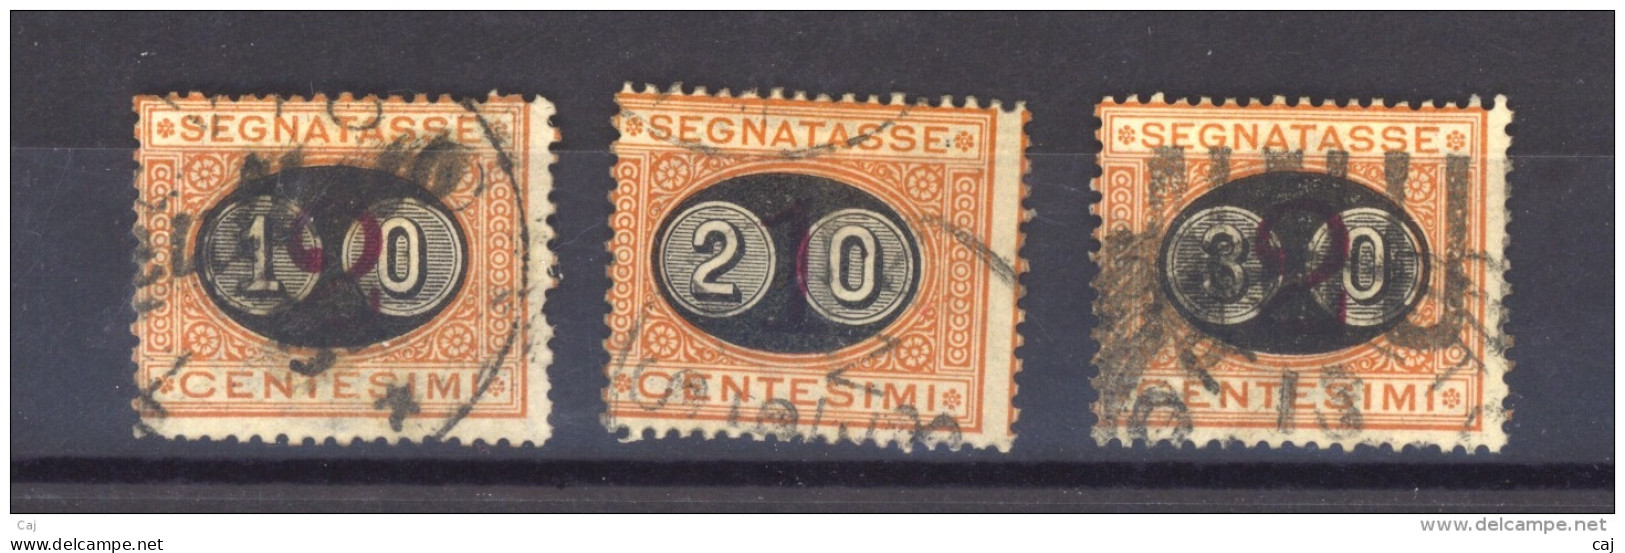 06000 -   Italie  -  Taxes  :  Yv   22-24  (o) - Postage Due